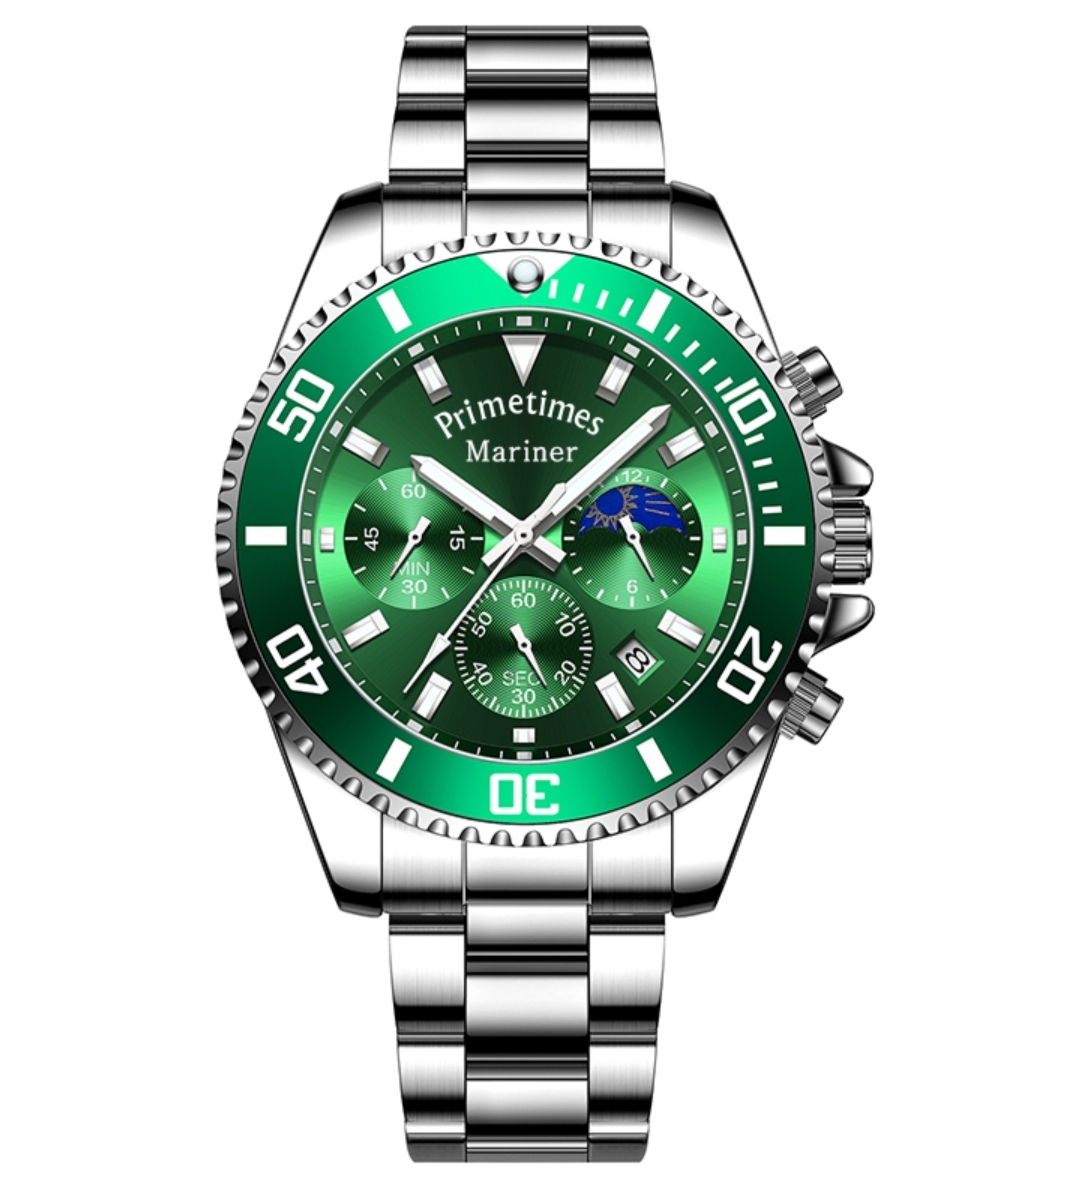 MARINER: Robust Mens Chronographic Diver Watches